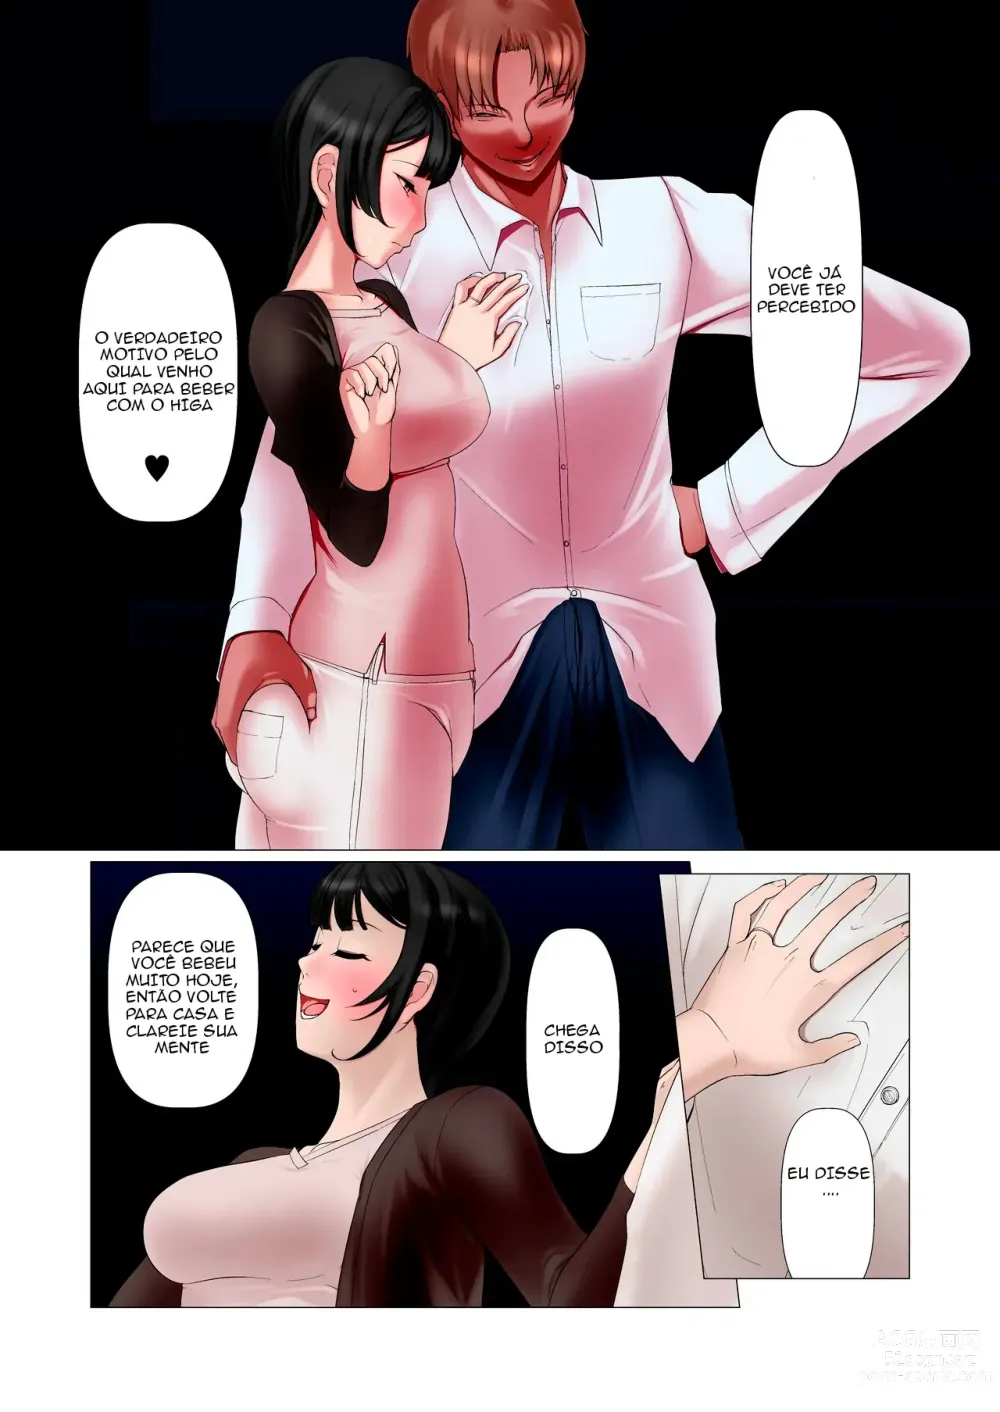 Page 7 of doujinshi This wife became that guy's meat onahole, too.